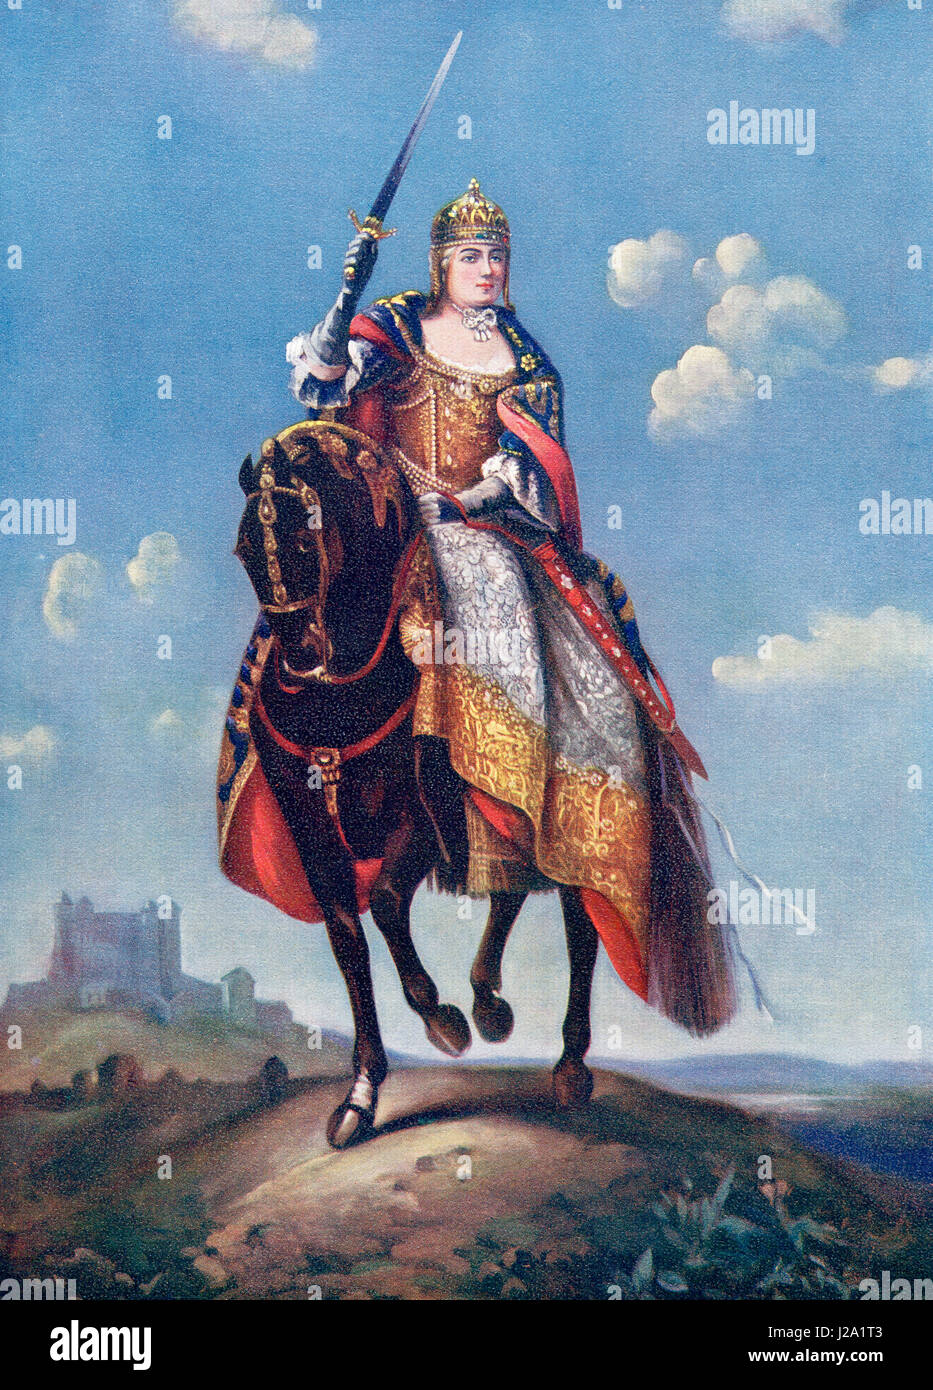 Maria Theresa on the Coronation Hill at Pressburg.  Maria Theresa Walburga Amalia Christina, 1717 – 1780.  Only female ruler of the Habsburg dominions and the last of the House of Habsburg.  Sovereign of Austria, Hungary, Croatia, Bohemia, Transylvania, Mantua, Milan, Lodomeria and Galicia, the Austrian Netherlands and Parma, and by marriage, Duchess of Lorraine, Grand Duchess of Tuscany and Holy Roman Empress.  From Hutchinson's History of the Nations, published 1915 Stock Photo